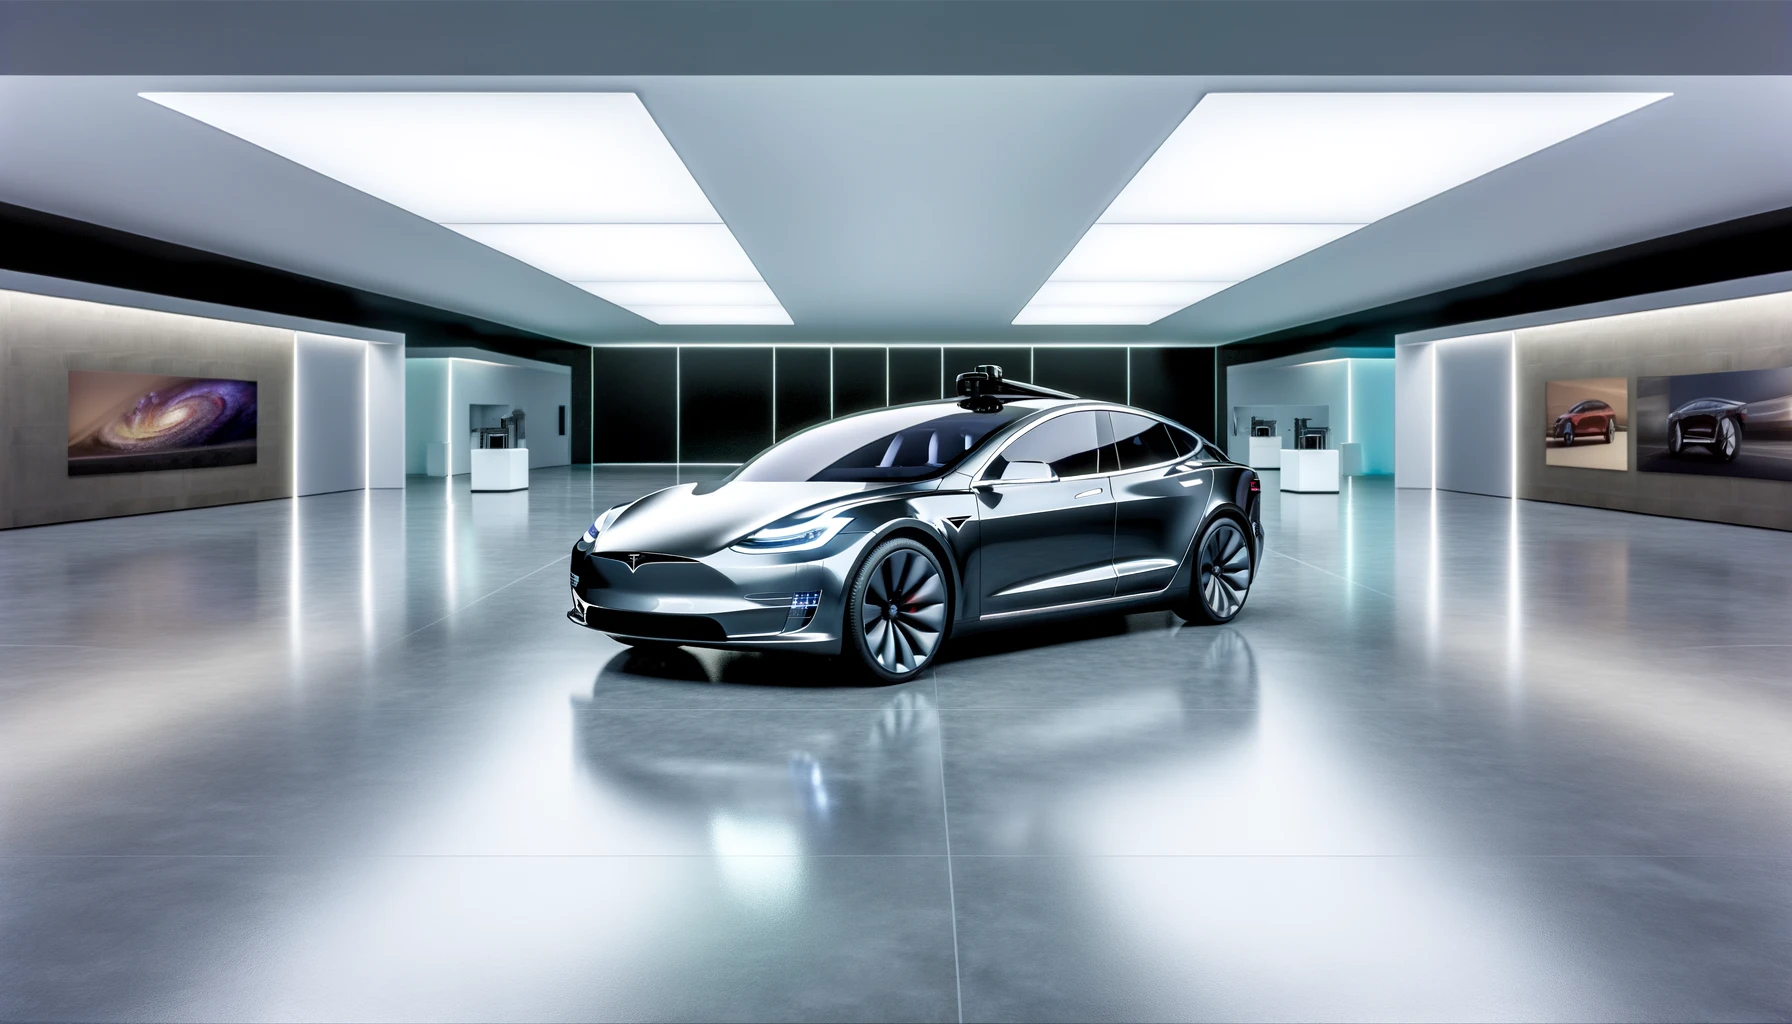 The Future of Driving: Tesla Showcases Cutting-Edge Full Self-Driving Technology